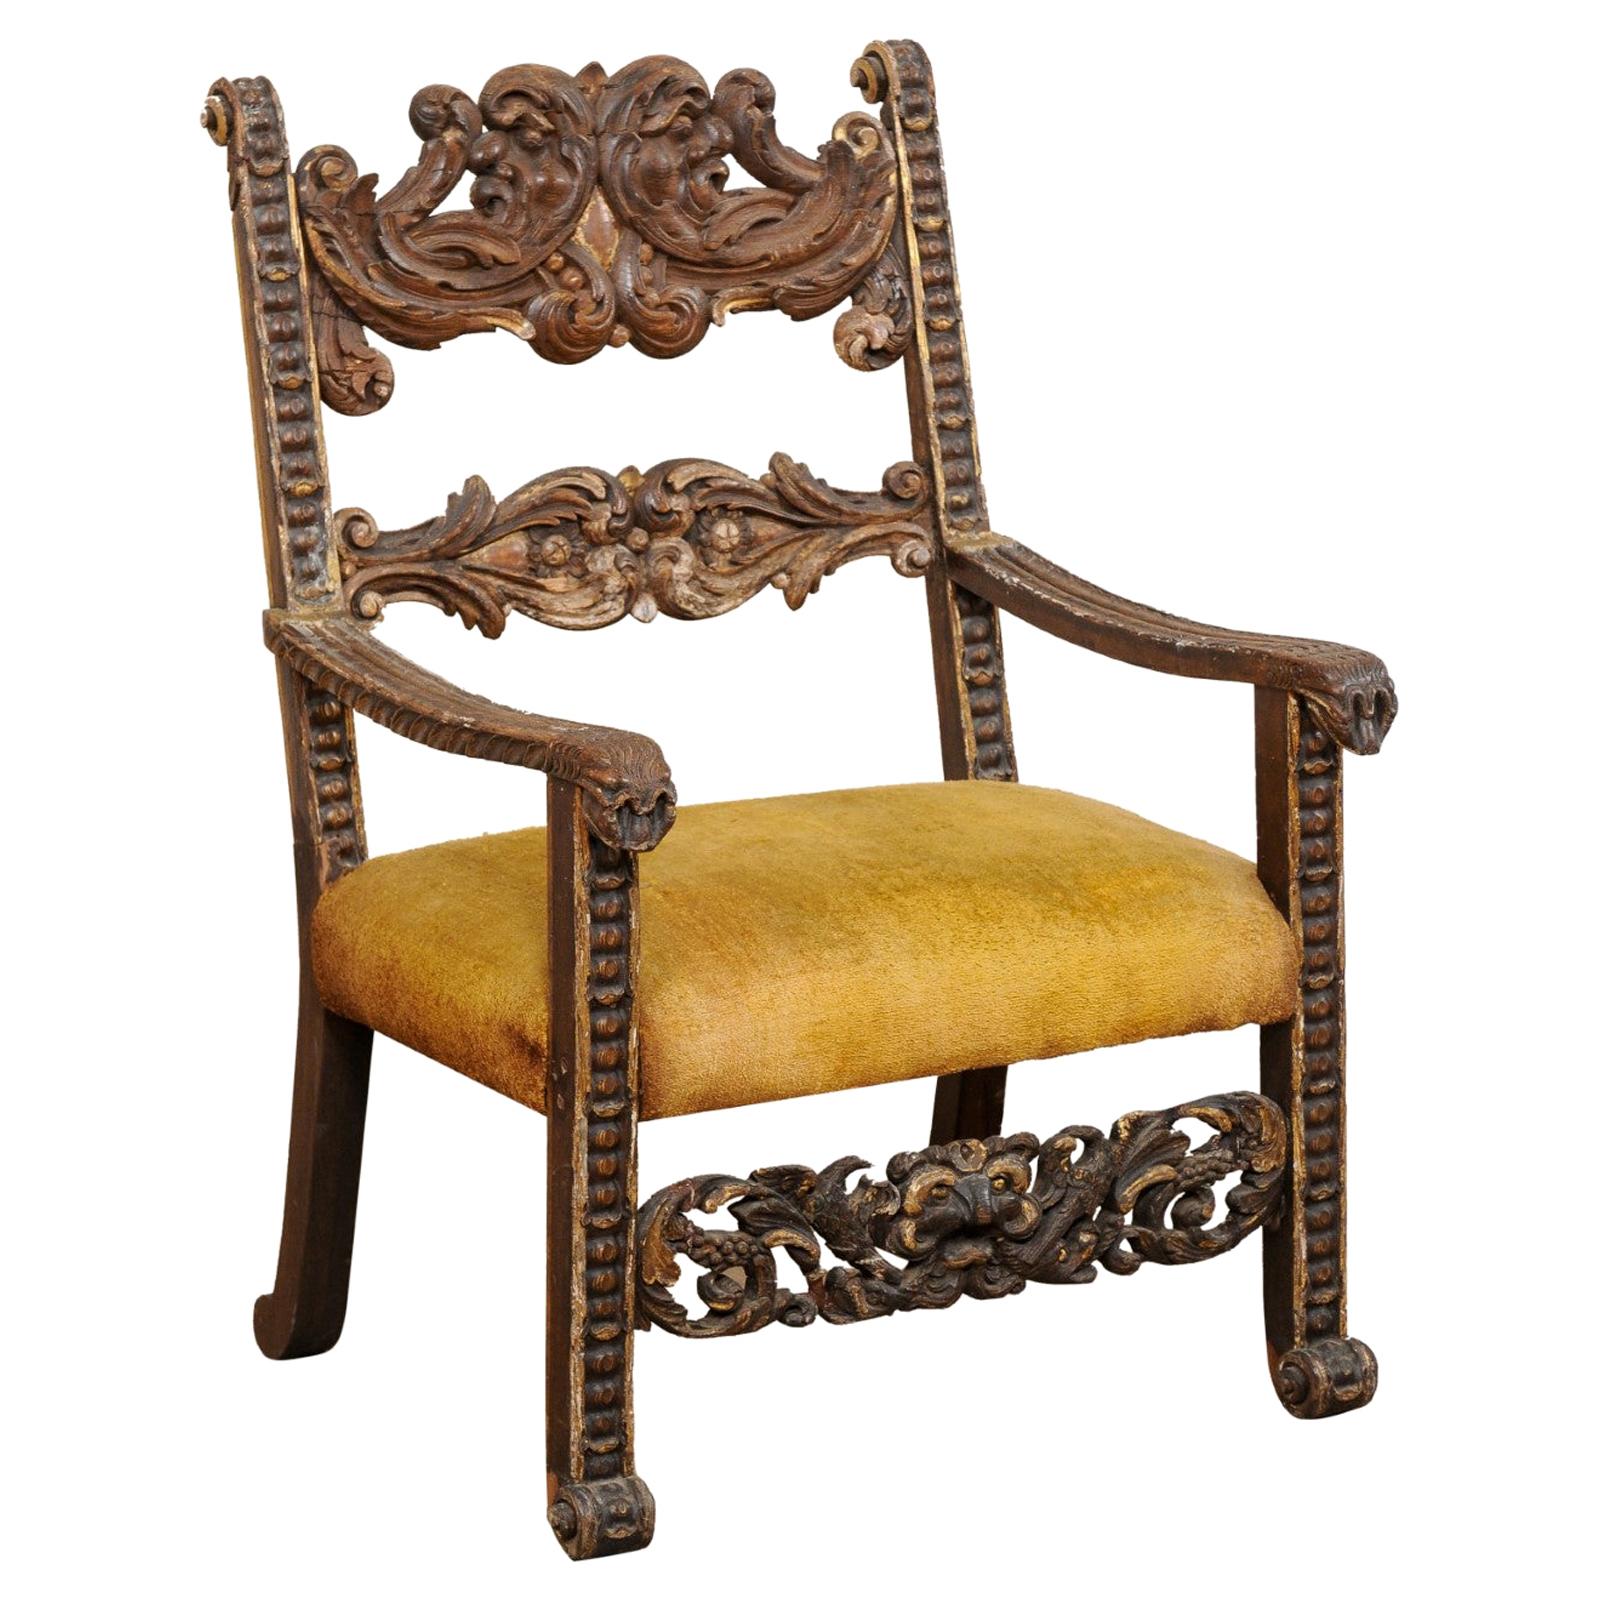 Handsome 18th C Italian Baroque Arm Chair with Intricately Carved Details